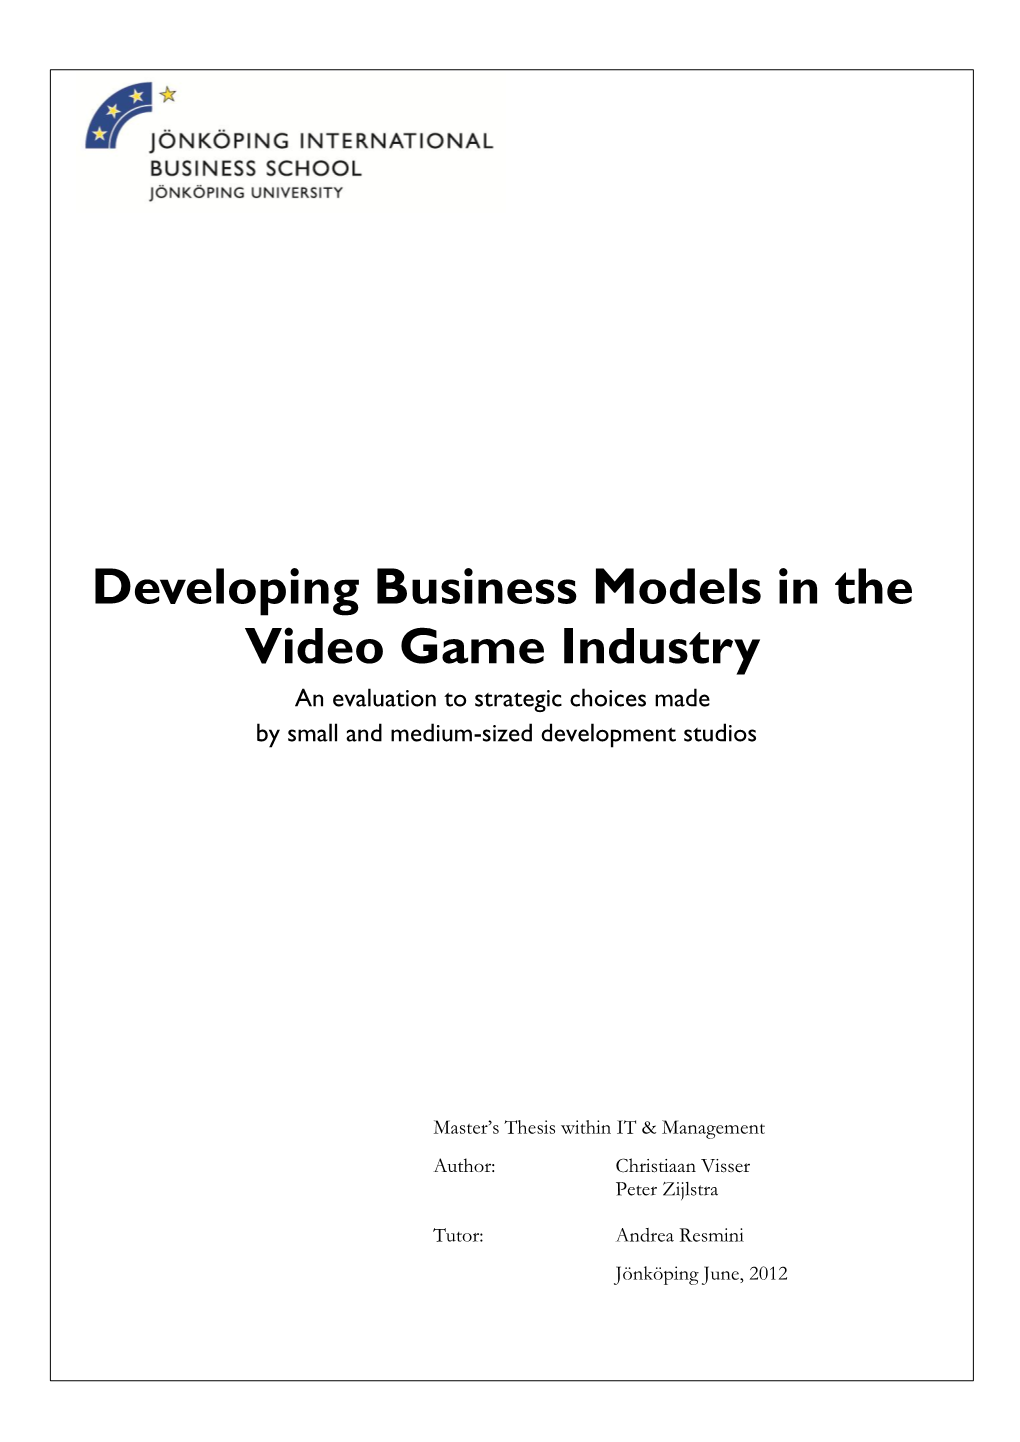 Developing Business Models in the Video Game Industry an Evaluation to Strategic Choices Made by Small and Medium-Sized Development Studios